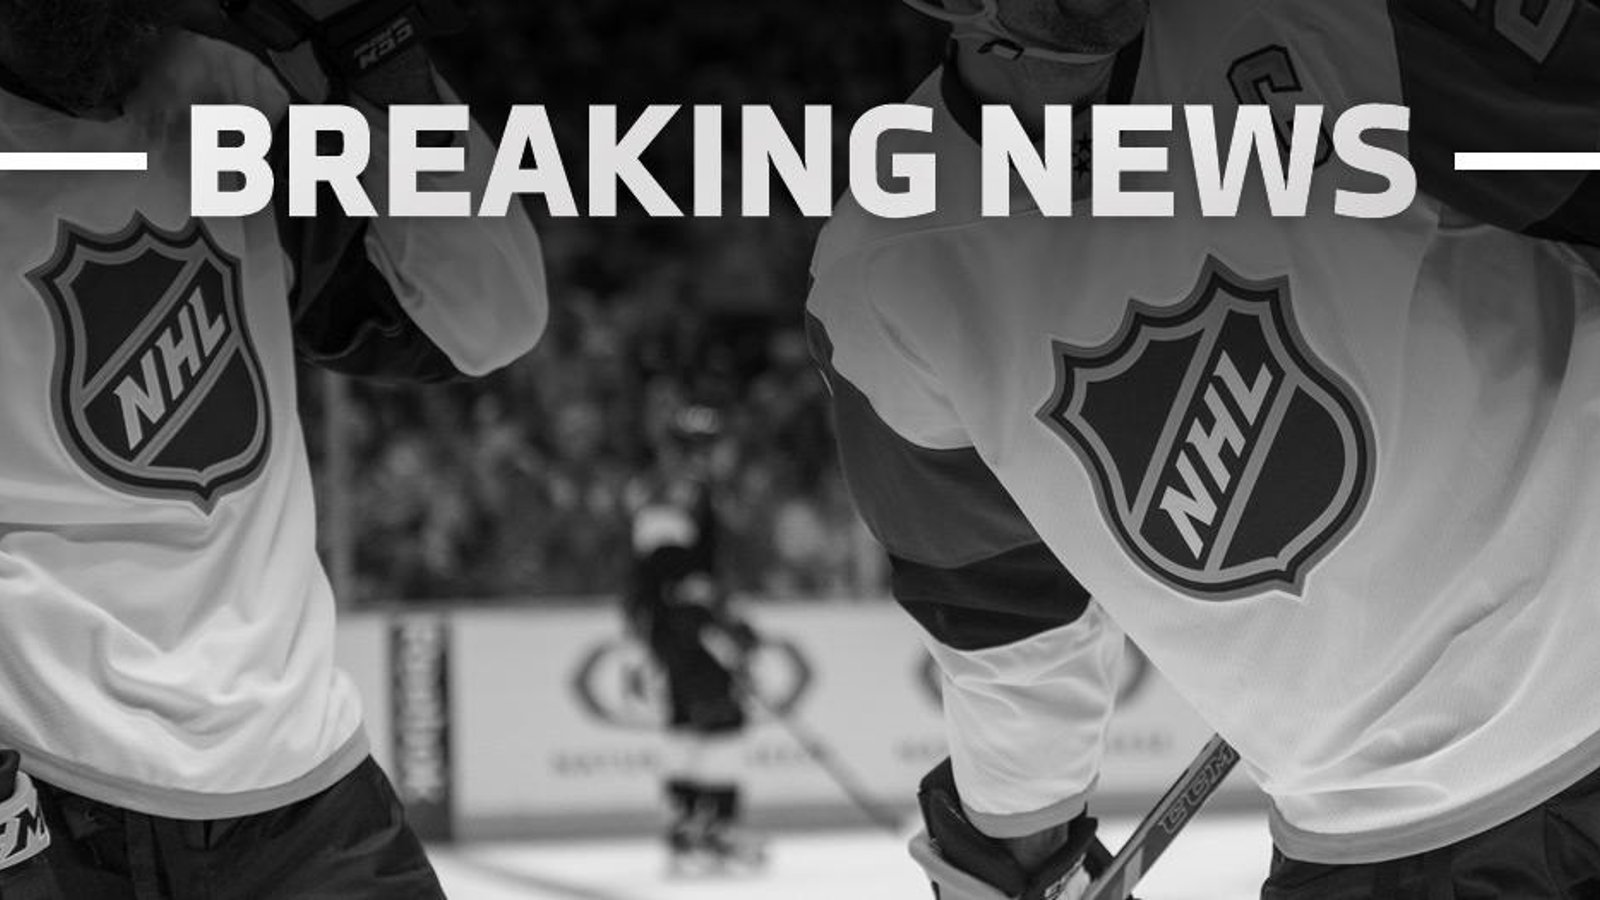 Breaking: The end of the road for one of the most hated men in the NHL?